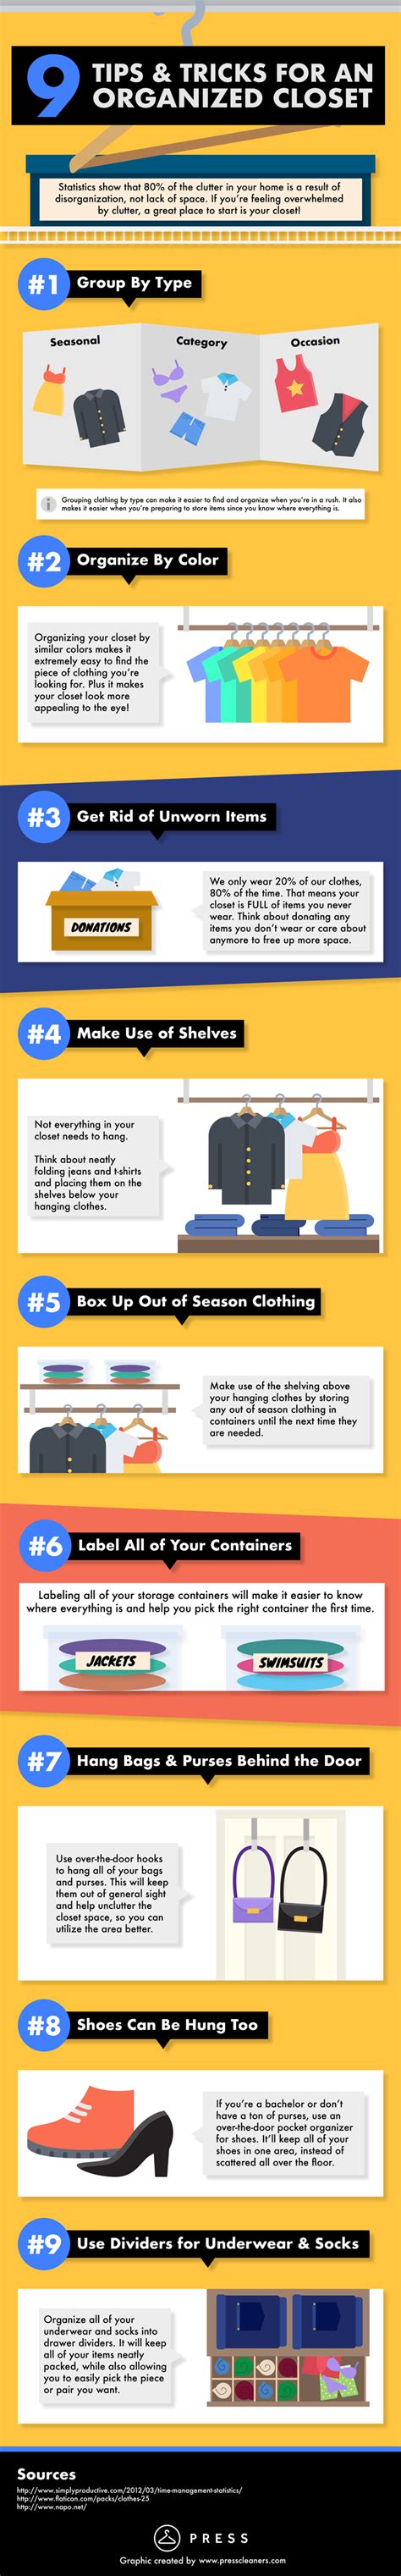 9 Tips And Tricks For An Organized Closet Infographic